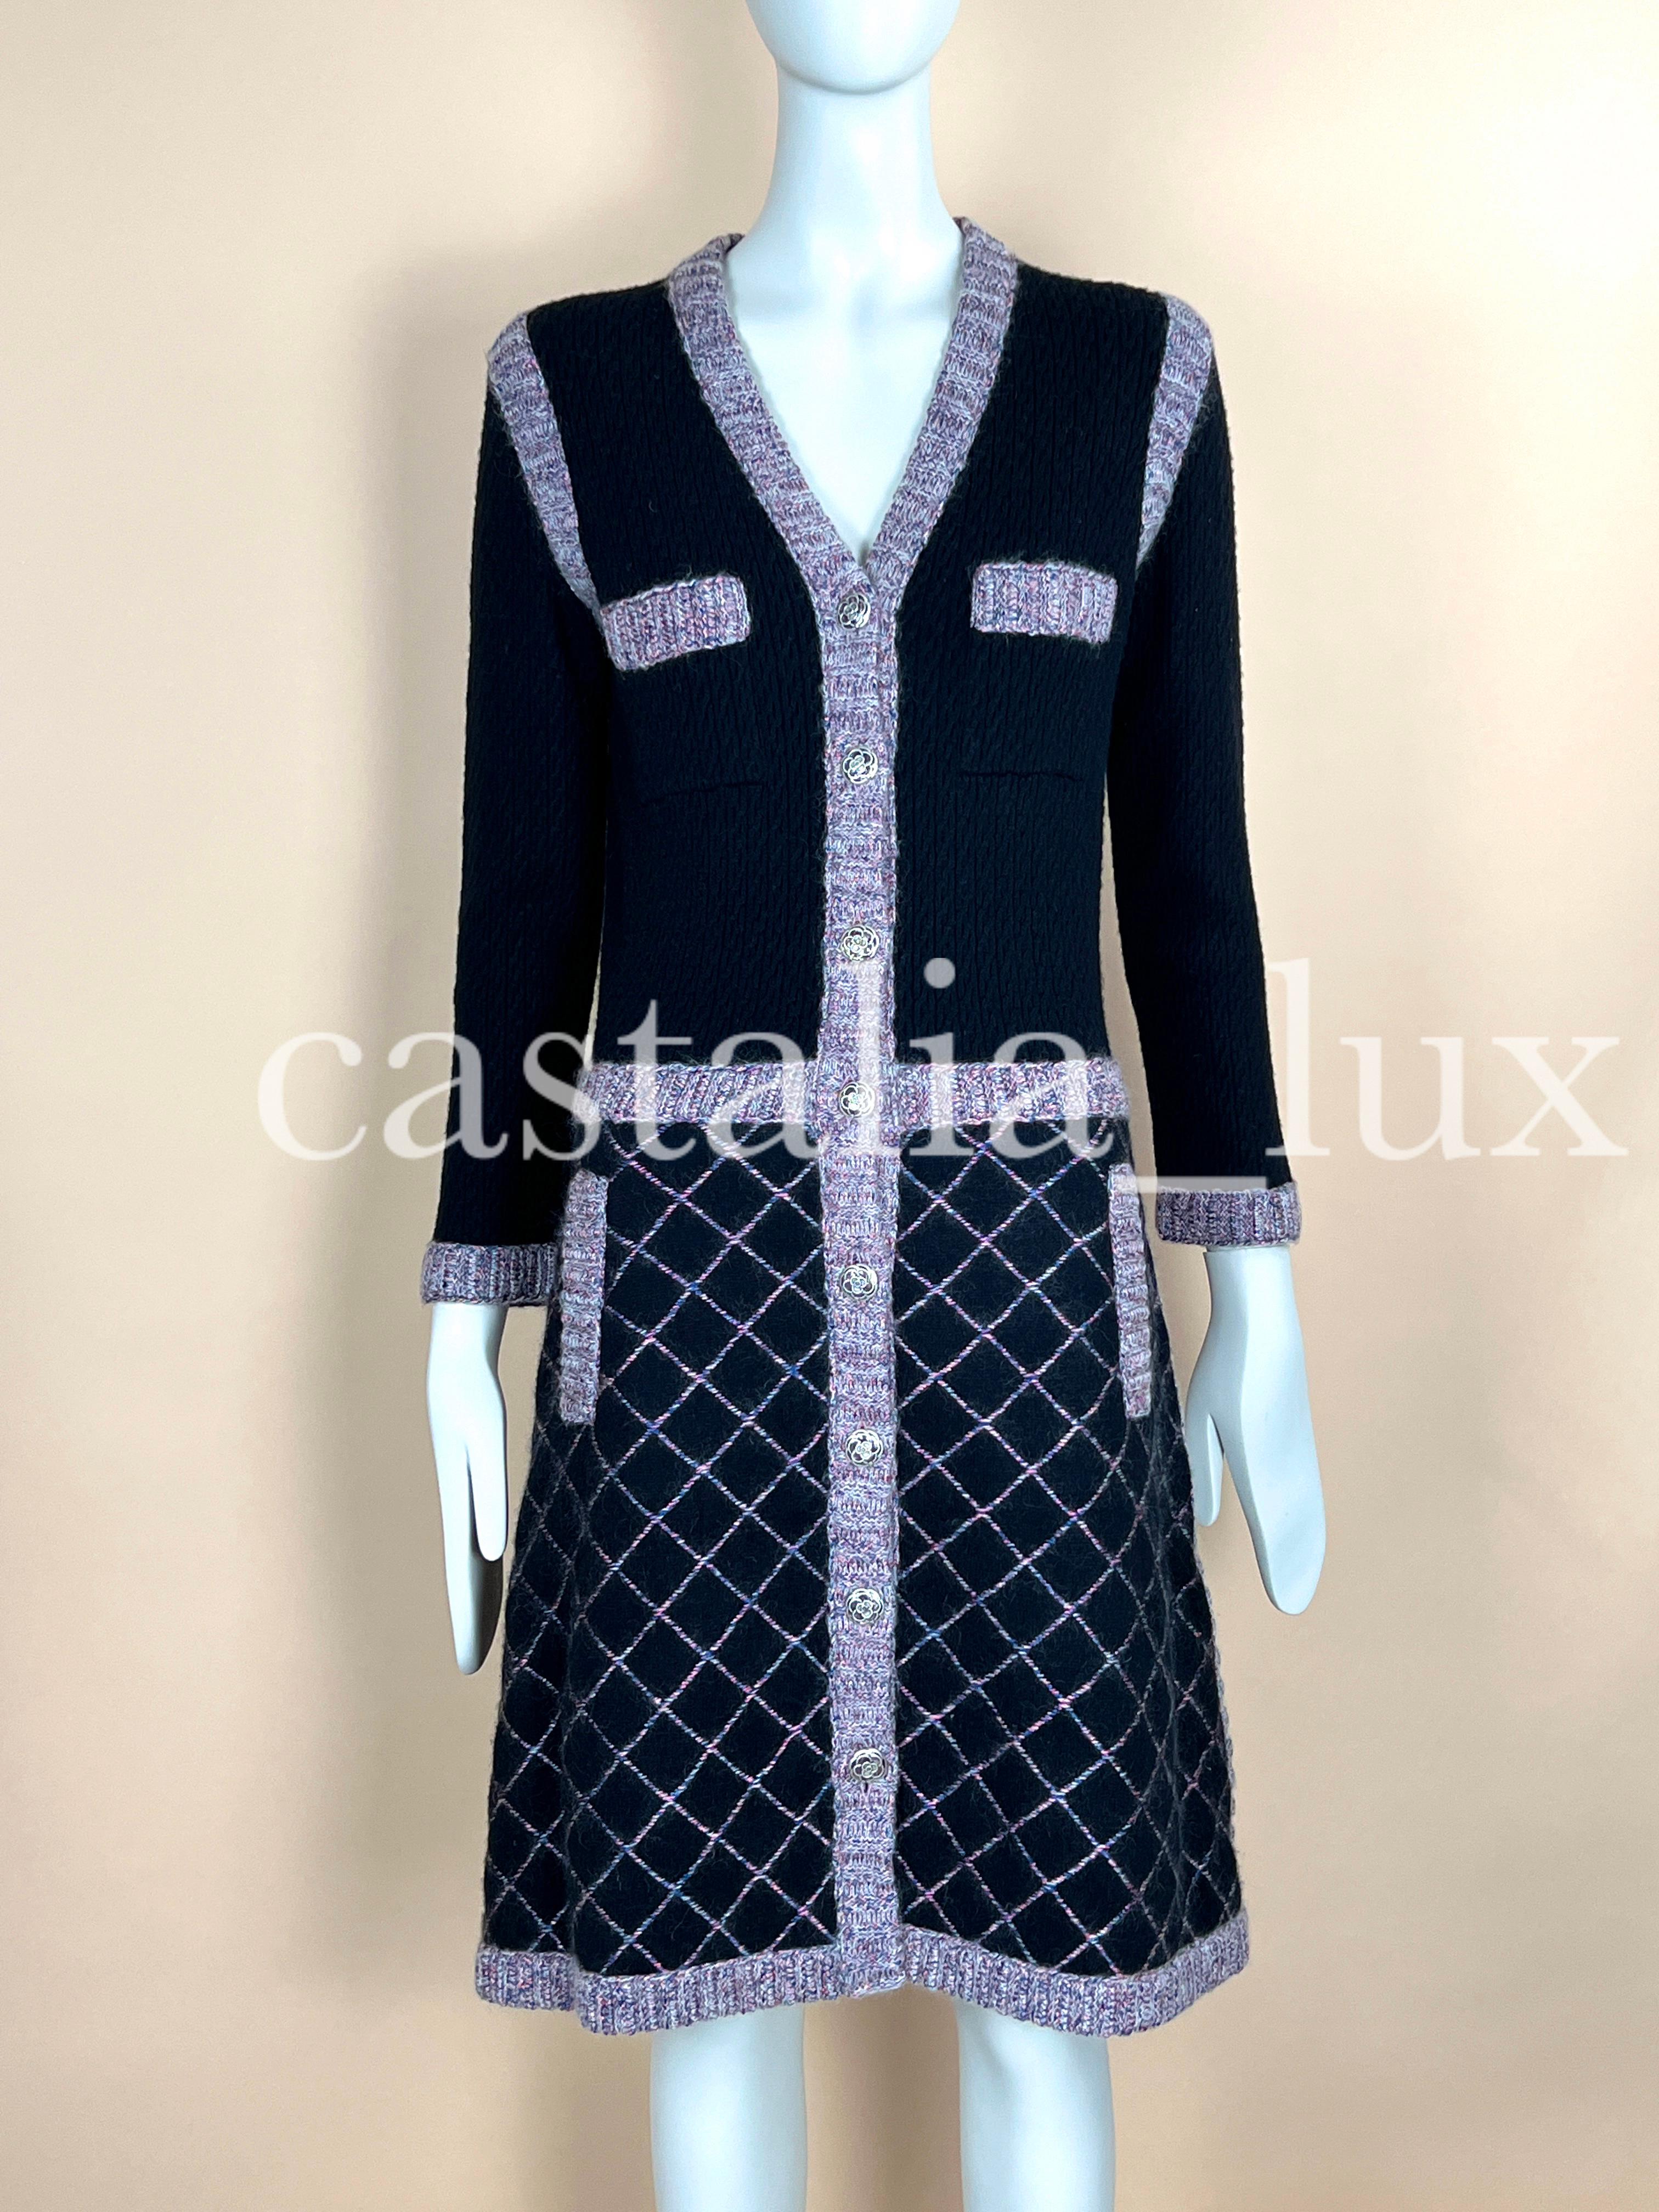 Chanel New Coco Brasserie Ad Campaign Jacket Dress For Sale 3